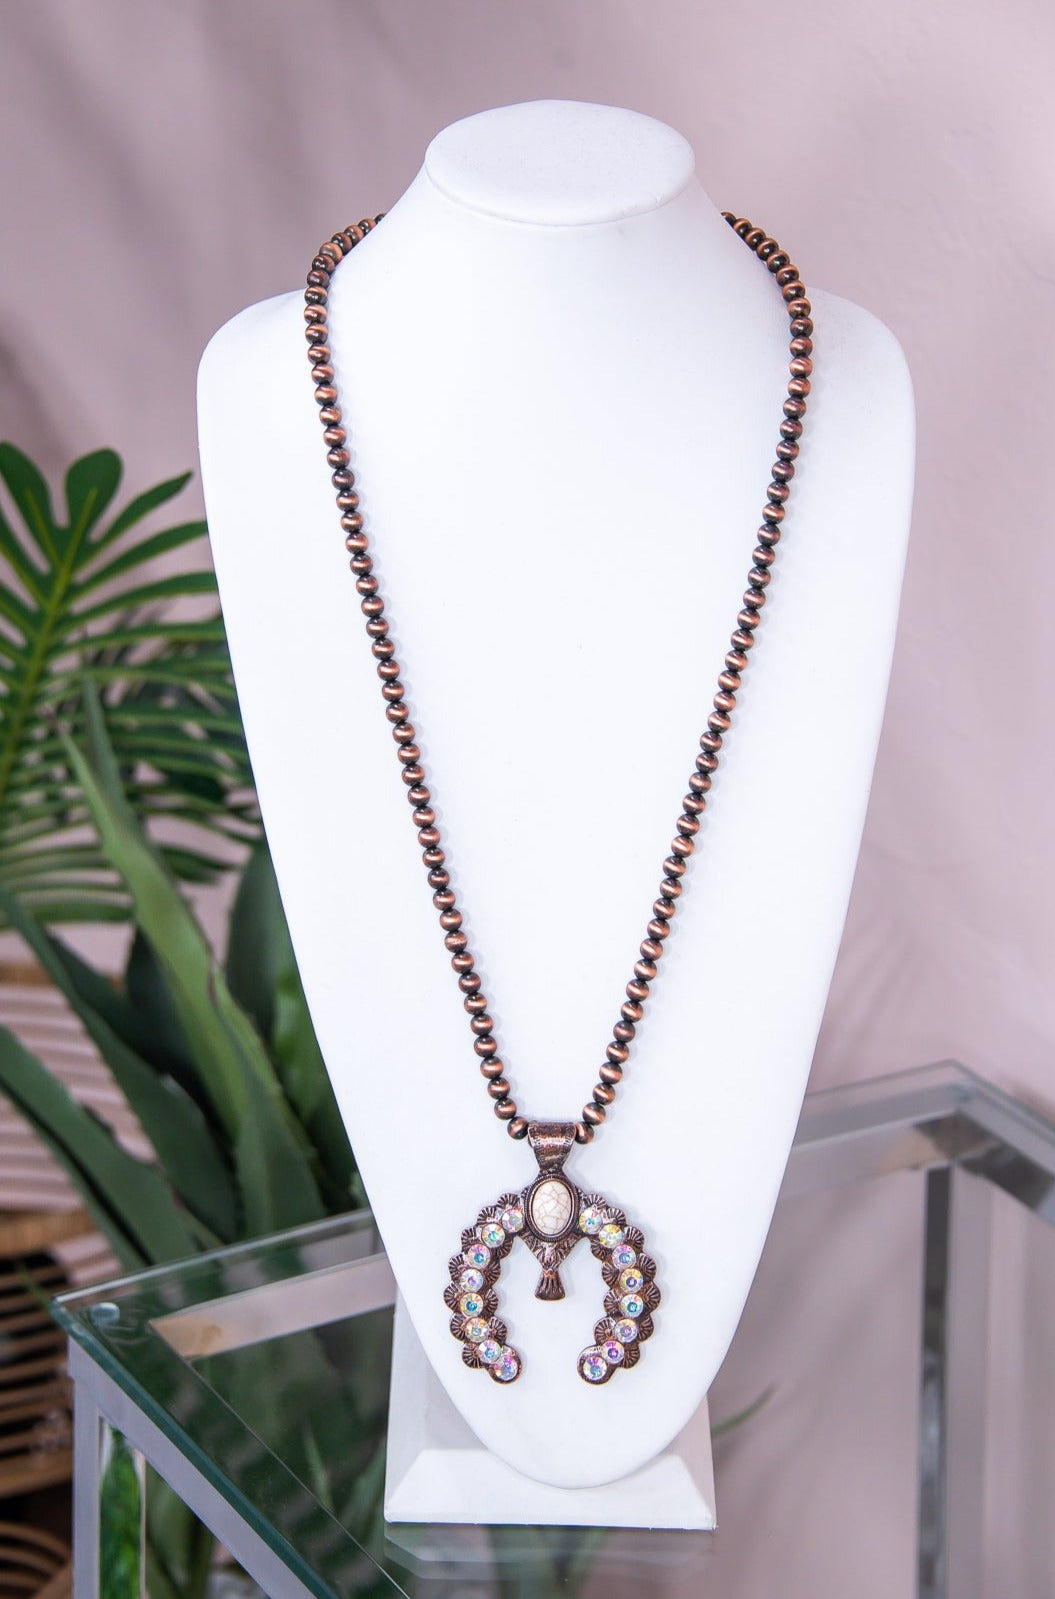 Copper/Ivory/Iridescent Studded/Beaded Necklace - NEK4212CP